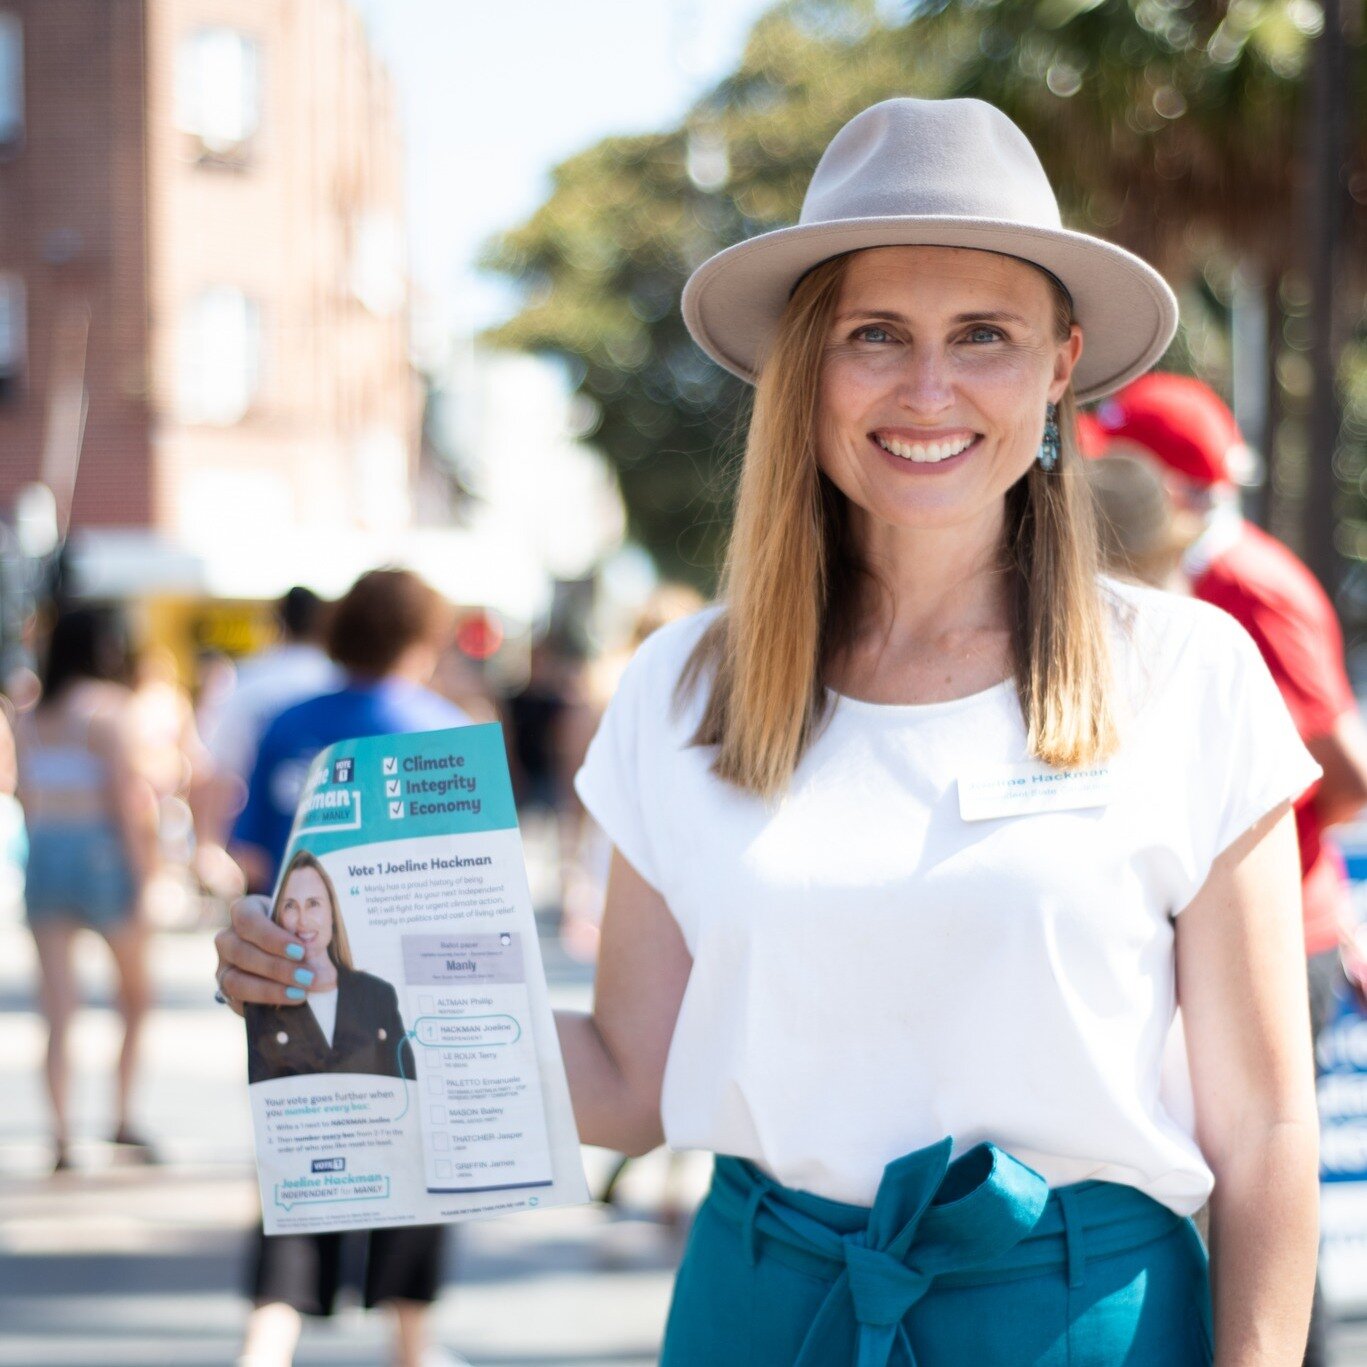 The first day of pre-poll ✅ Thank you to all the wonderful volunteers braving the heat to hand out how-to-vote cards.

Early voting starts again on Monday at 8:30am at
📍 St Matthew's Church, Manly
📍 27-33 Oaks Avenue, Dee Why
📍 145 Pittwater Rd, B